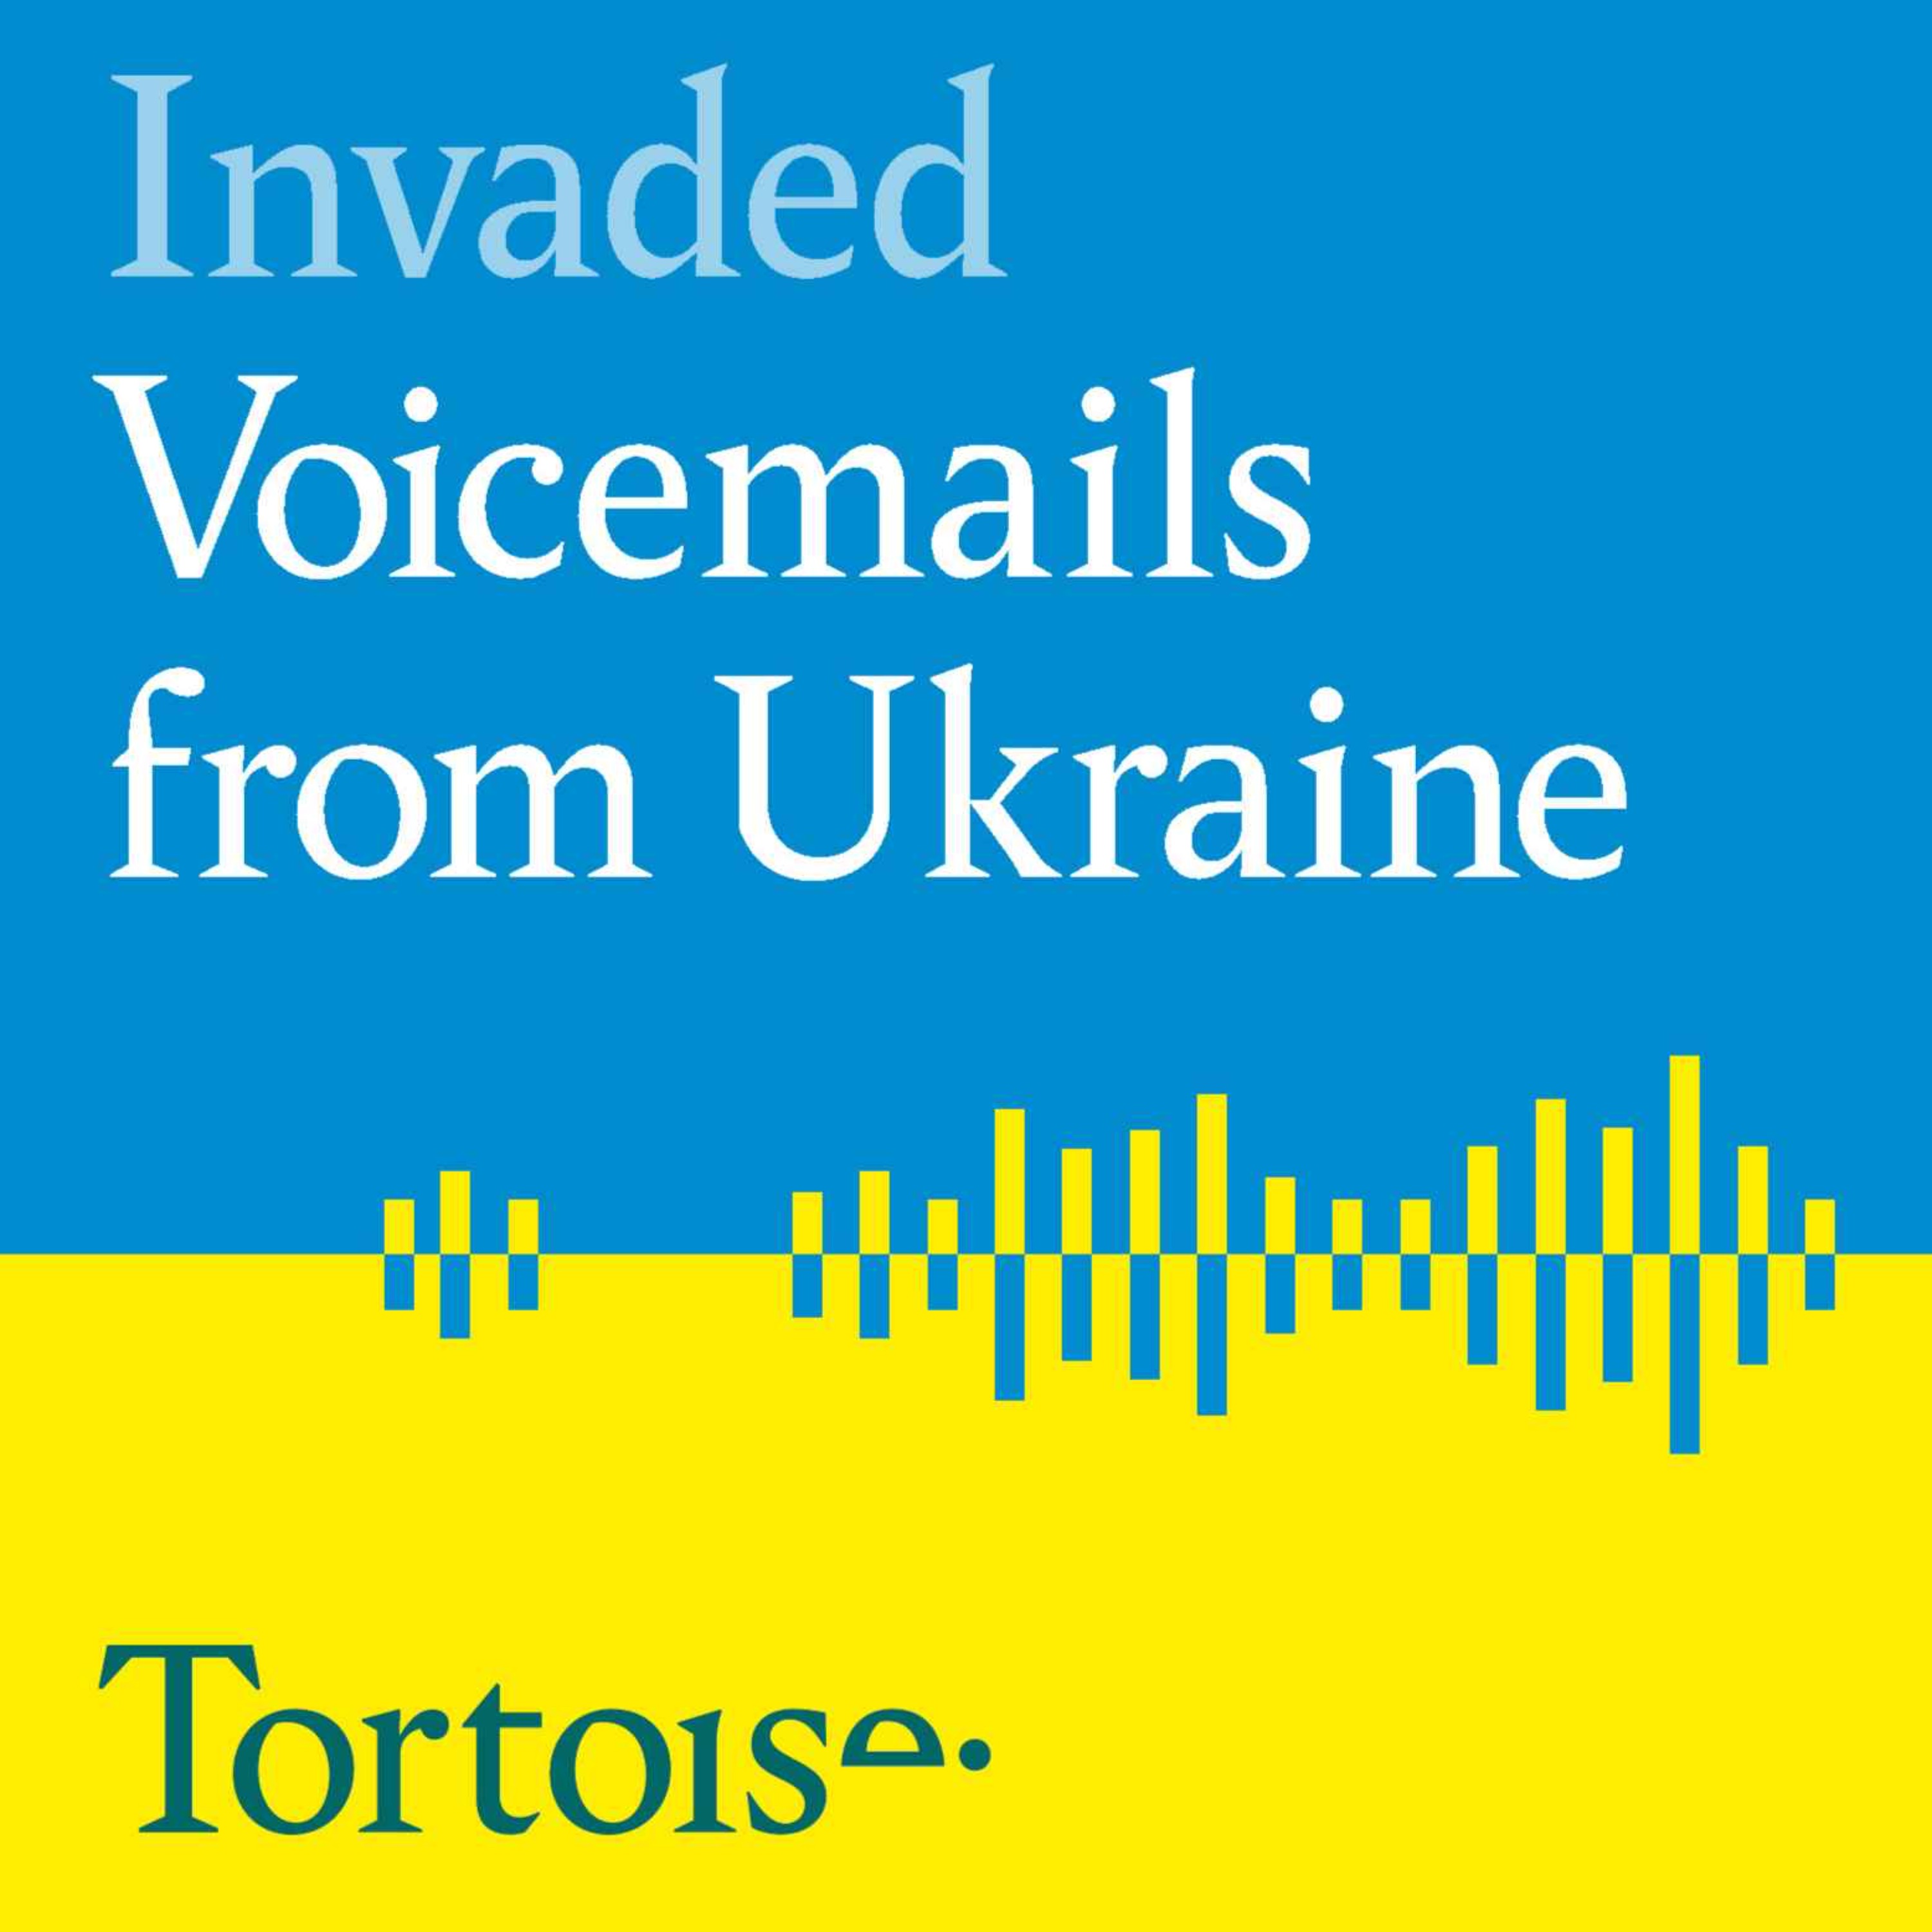 A Voicemail from Ukraine